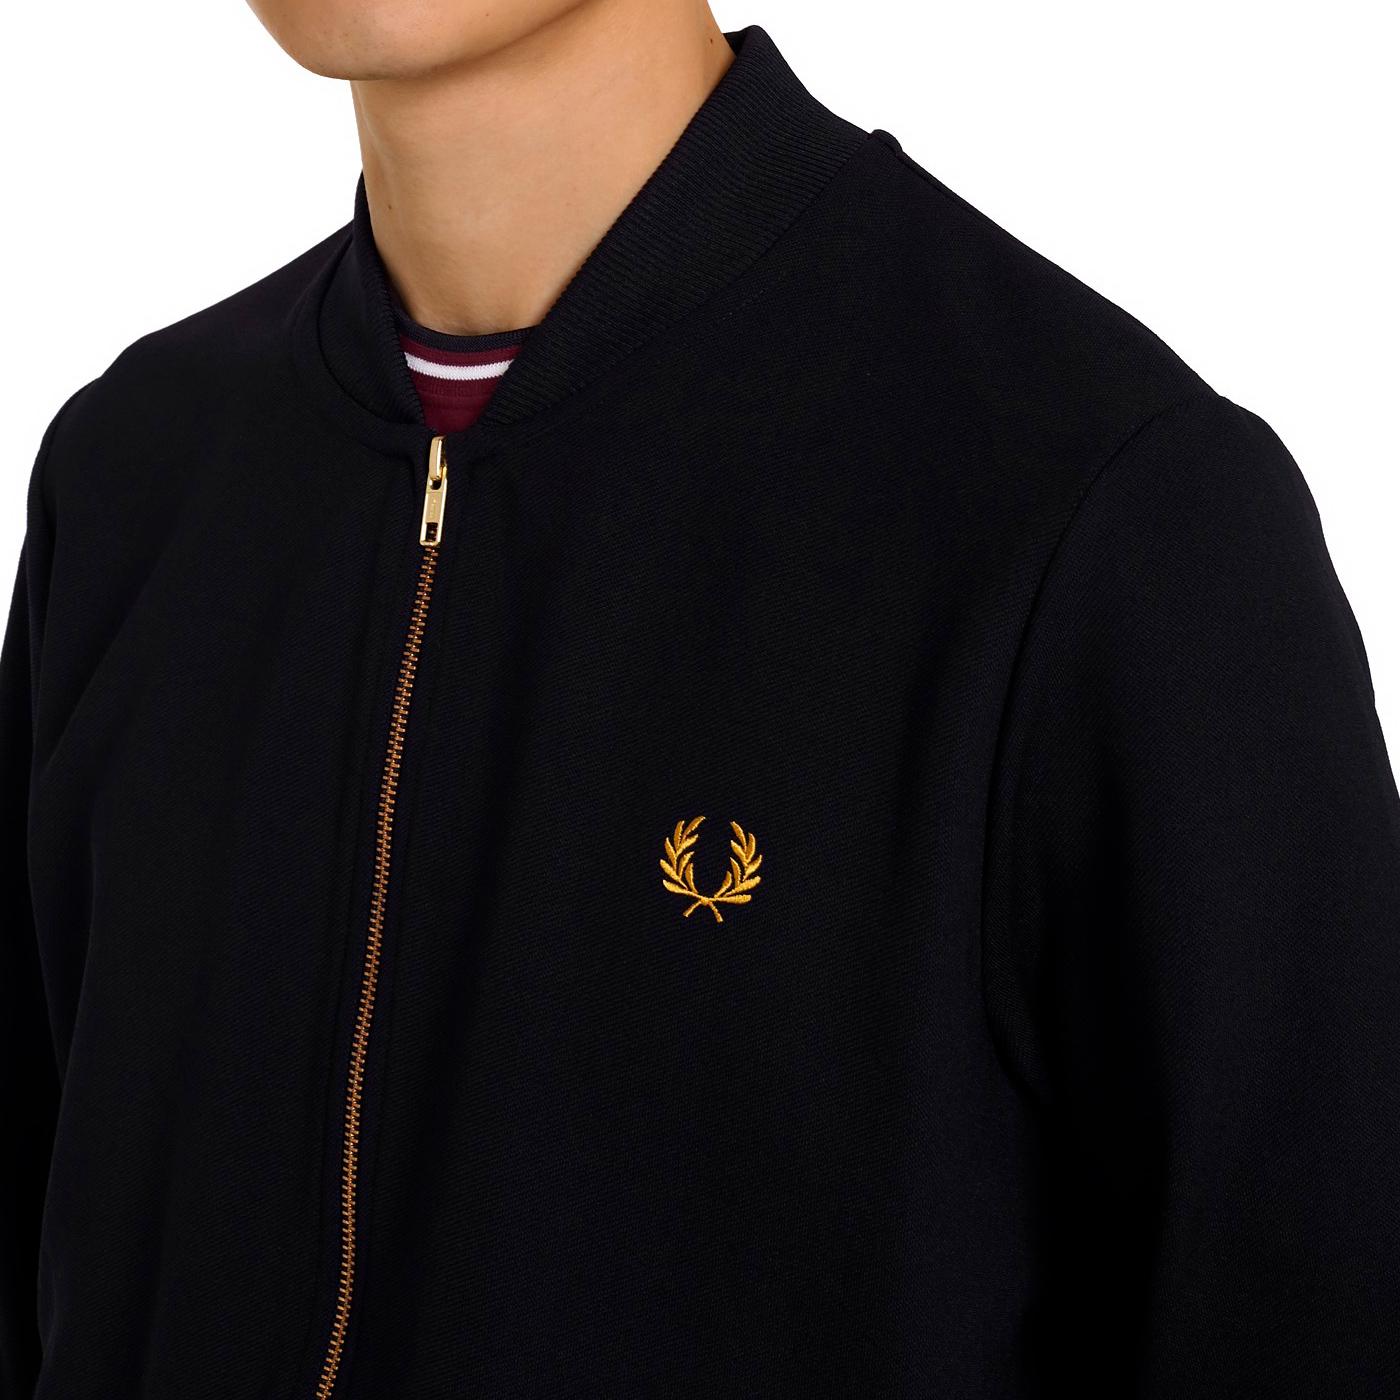 FRED PERRY Bomber Collar Twill Track Jacket (B)